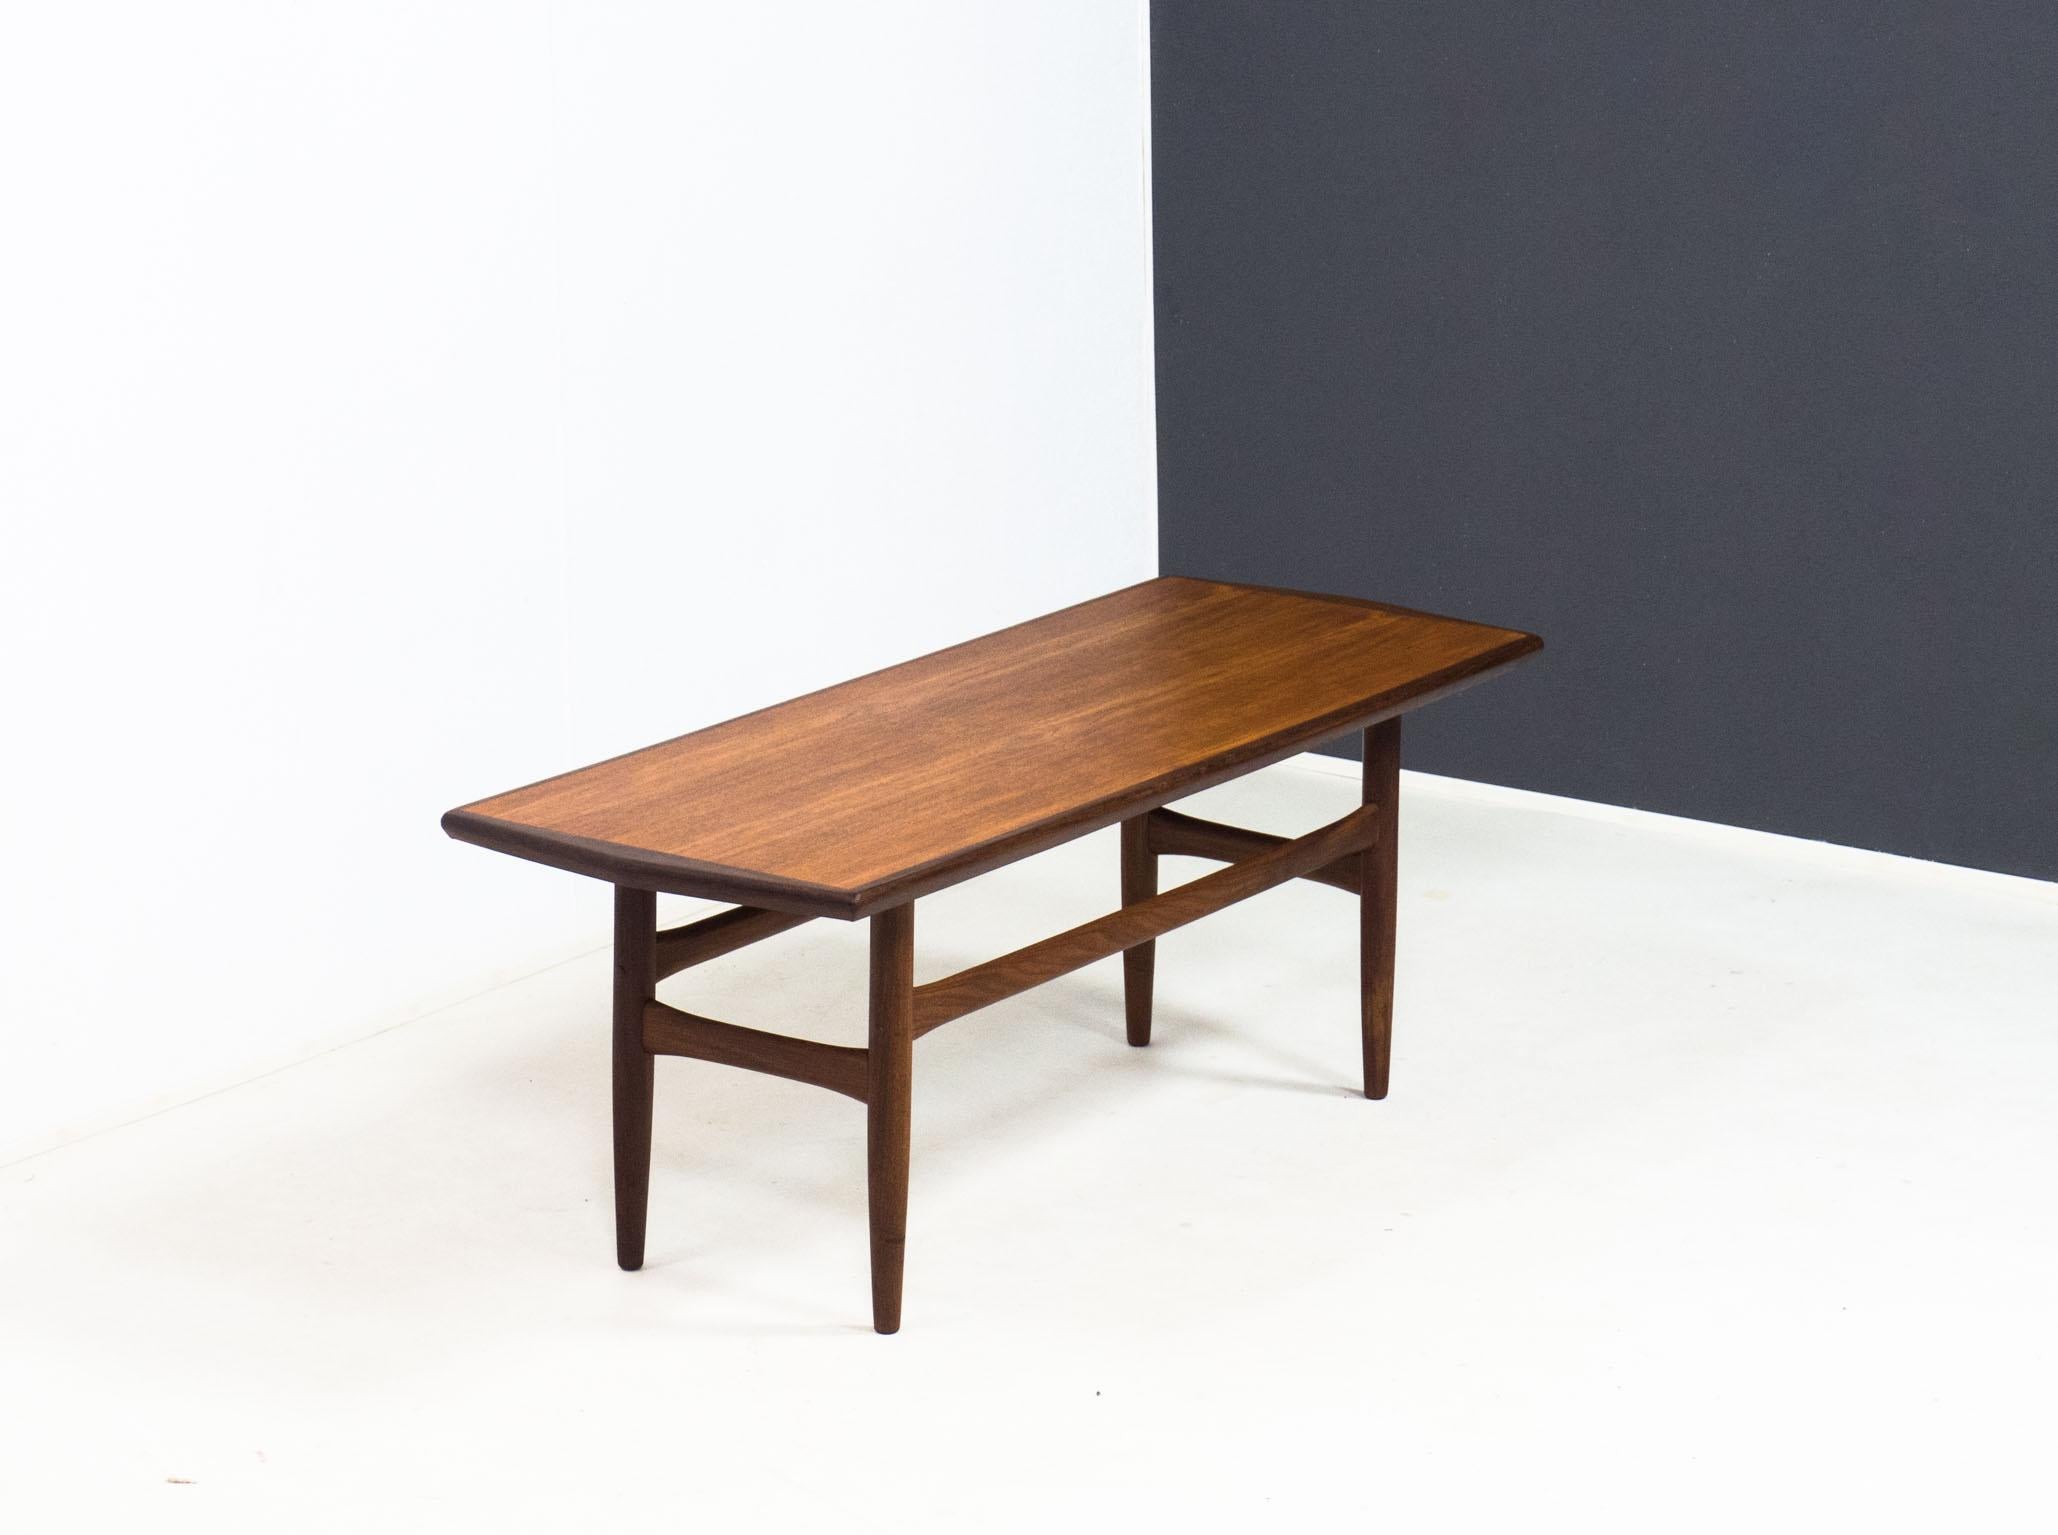 Vintage coffee table from the 1960s, most likely produced in The Netherlands.

This table has a top veneered with teak, and edges and frame made from solid afrormosia or ‘afro-teak’.

The table is in good condition. There are some signs of use on